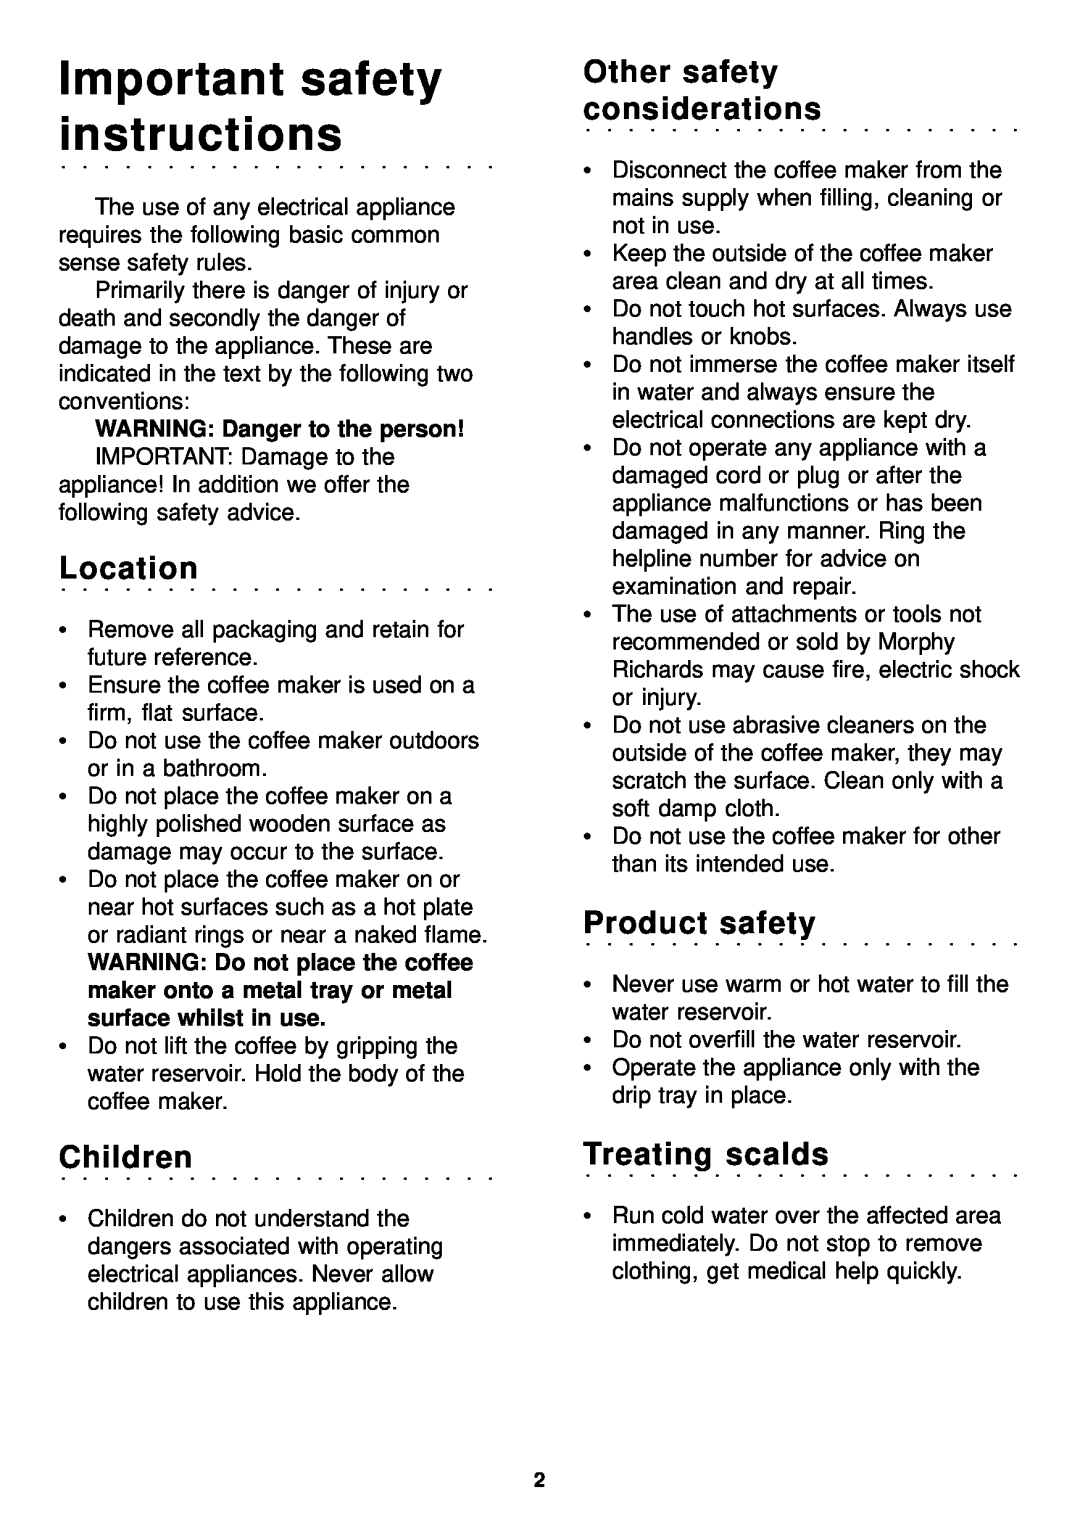 Morphy Richards espresso WARNING Danger to the person, Important safety instructions, Location, Children, Product safety 